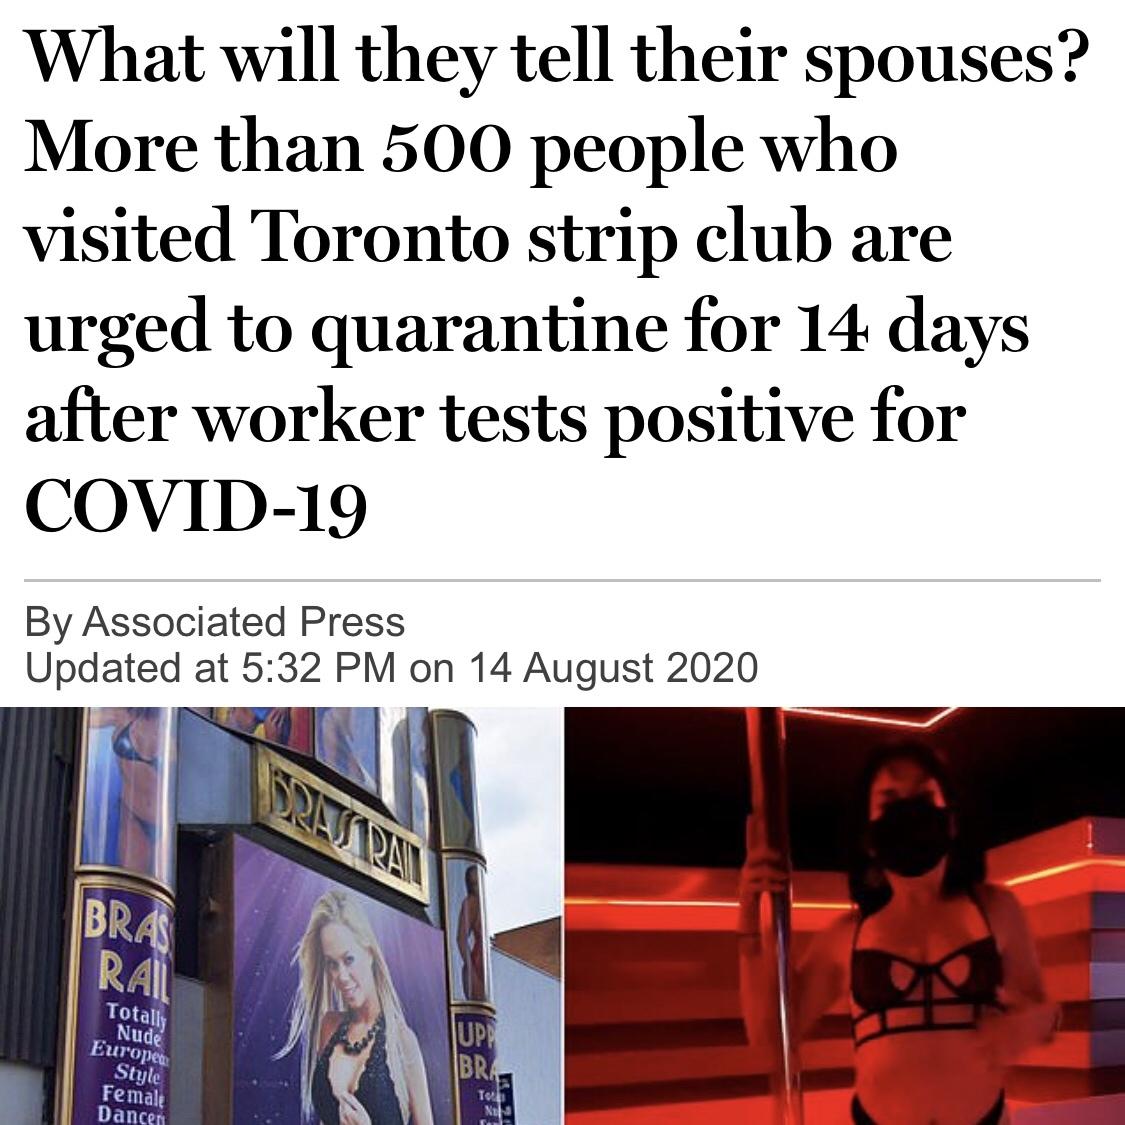 What will they tell their spouses? More than 500 people who visited Toronto strip club are urged to quarantine for 14 days after worker tests positive for Covid19 By Associated Press